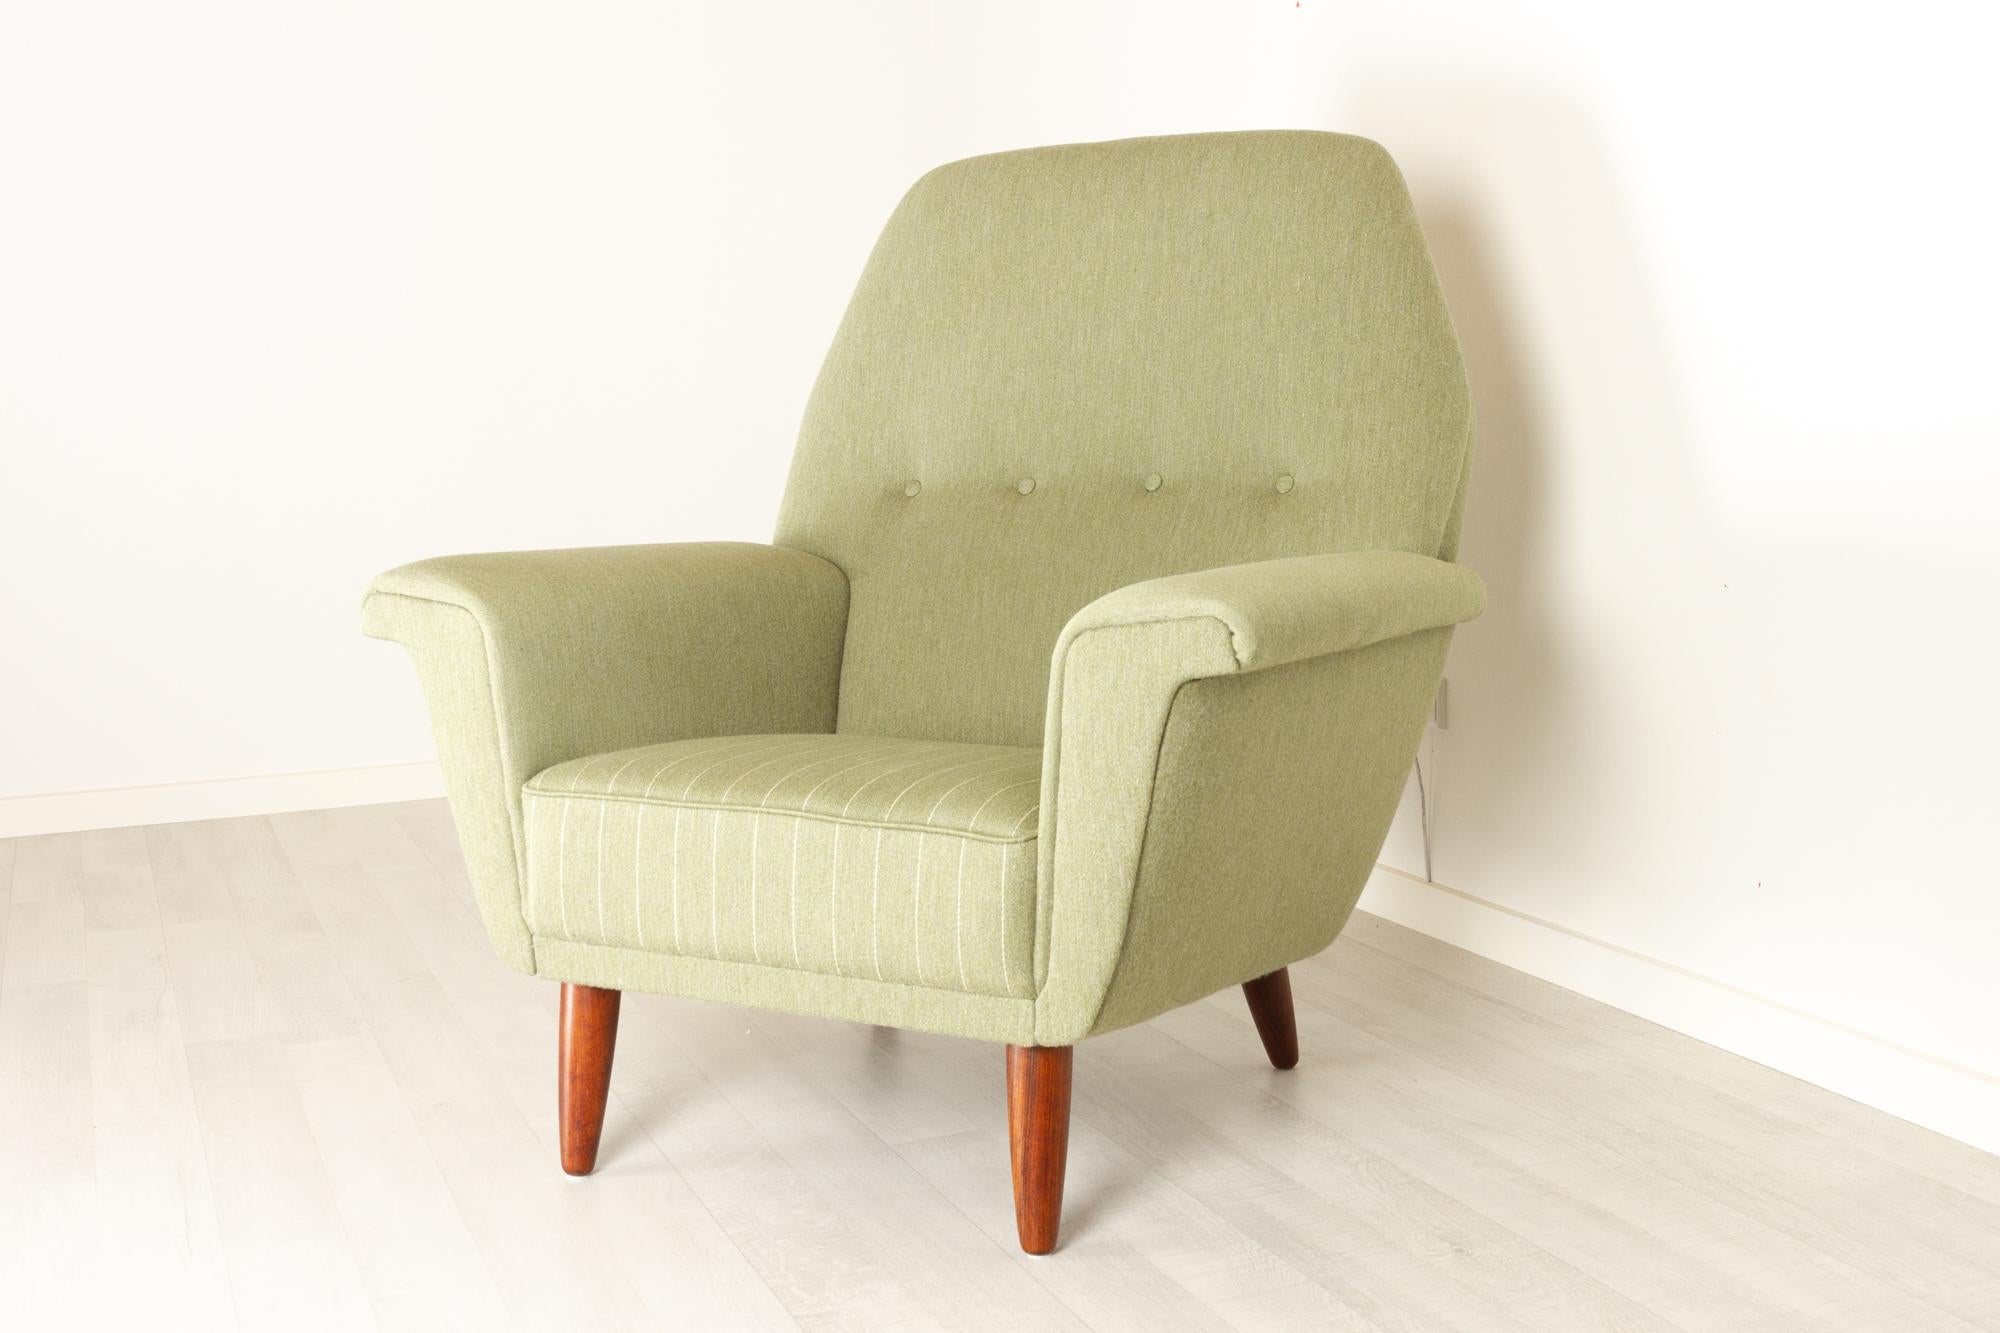 Vintage Danish Highback lounge chair by G. Thams for Vejen Polstermøbelfabrik, 1960s.
Model 53 designed in the early 1960s by Danish architect Georg Thams. Mid-Century Modern high back lounge chair in light green wool upholstery. Seat has a fixed